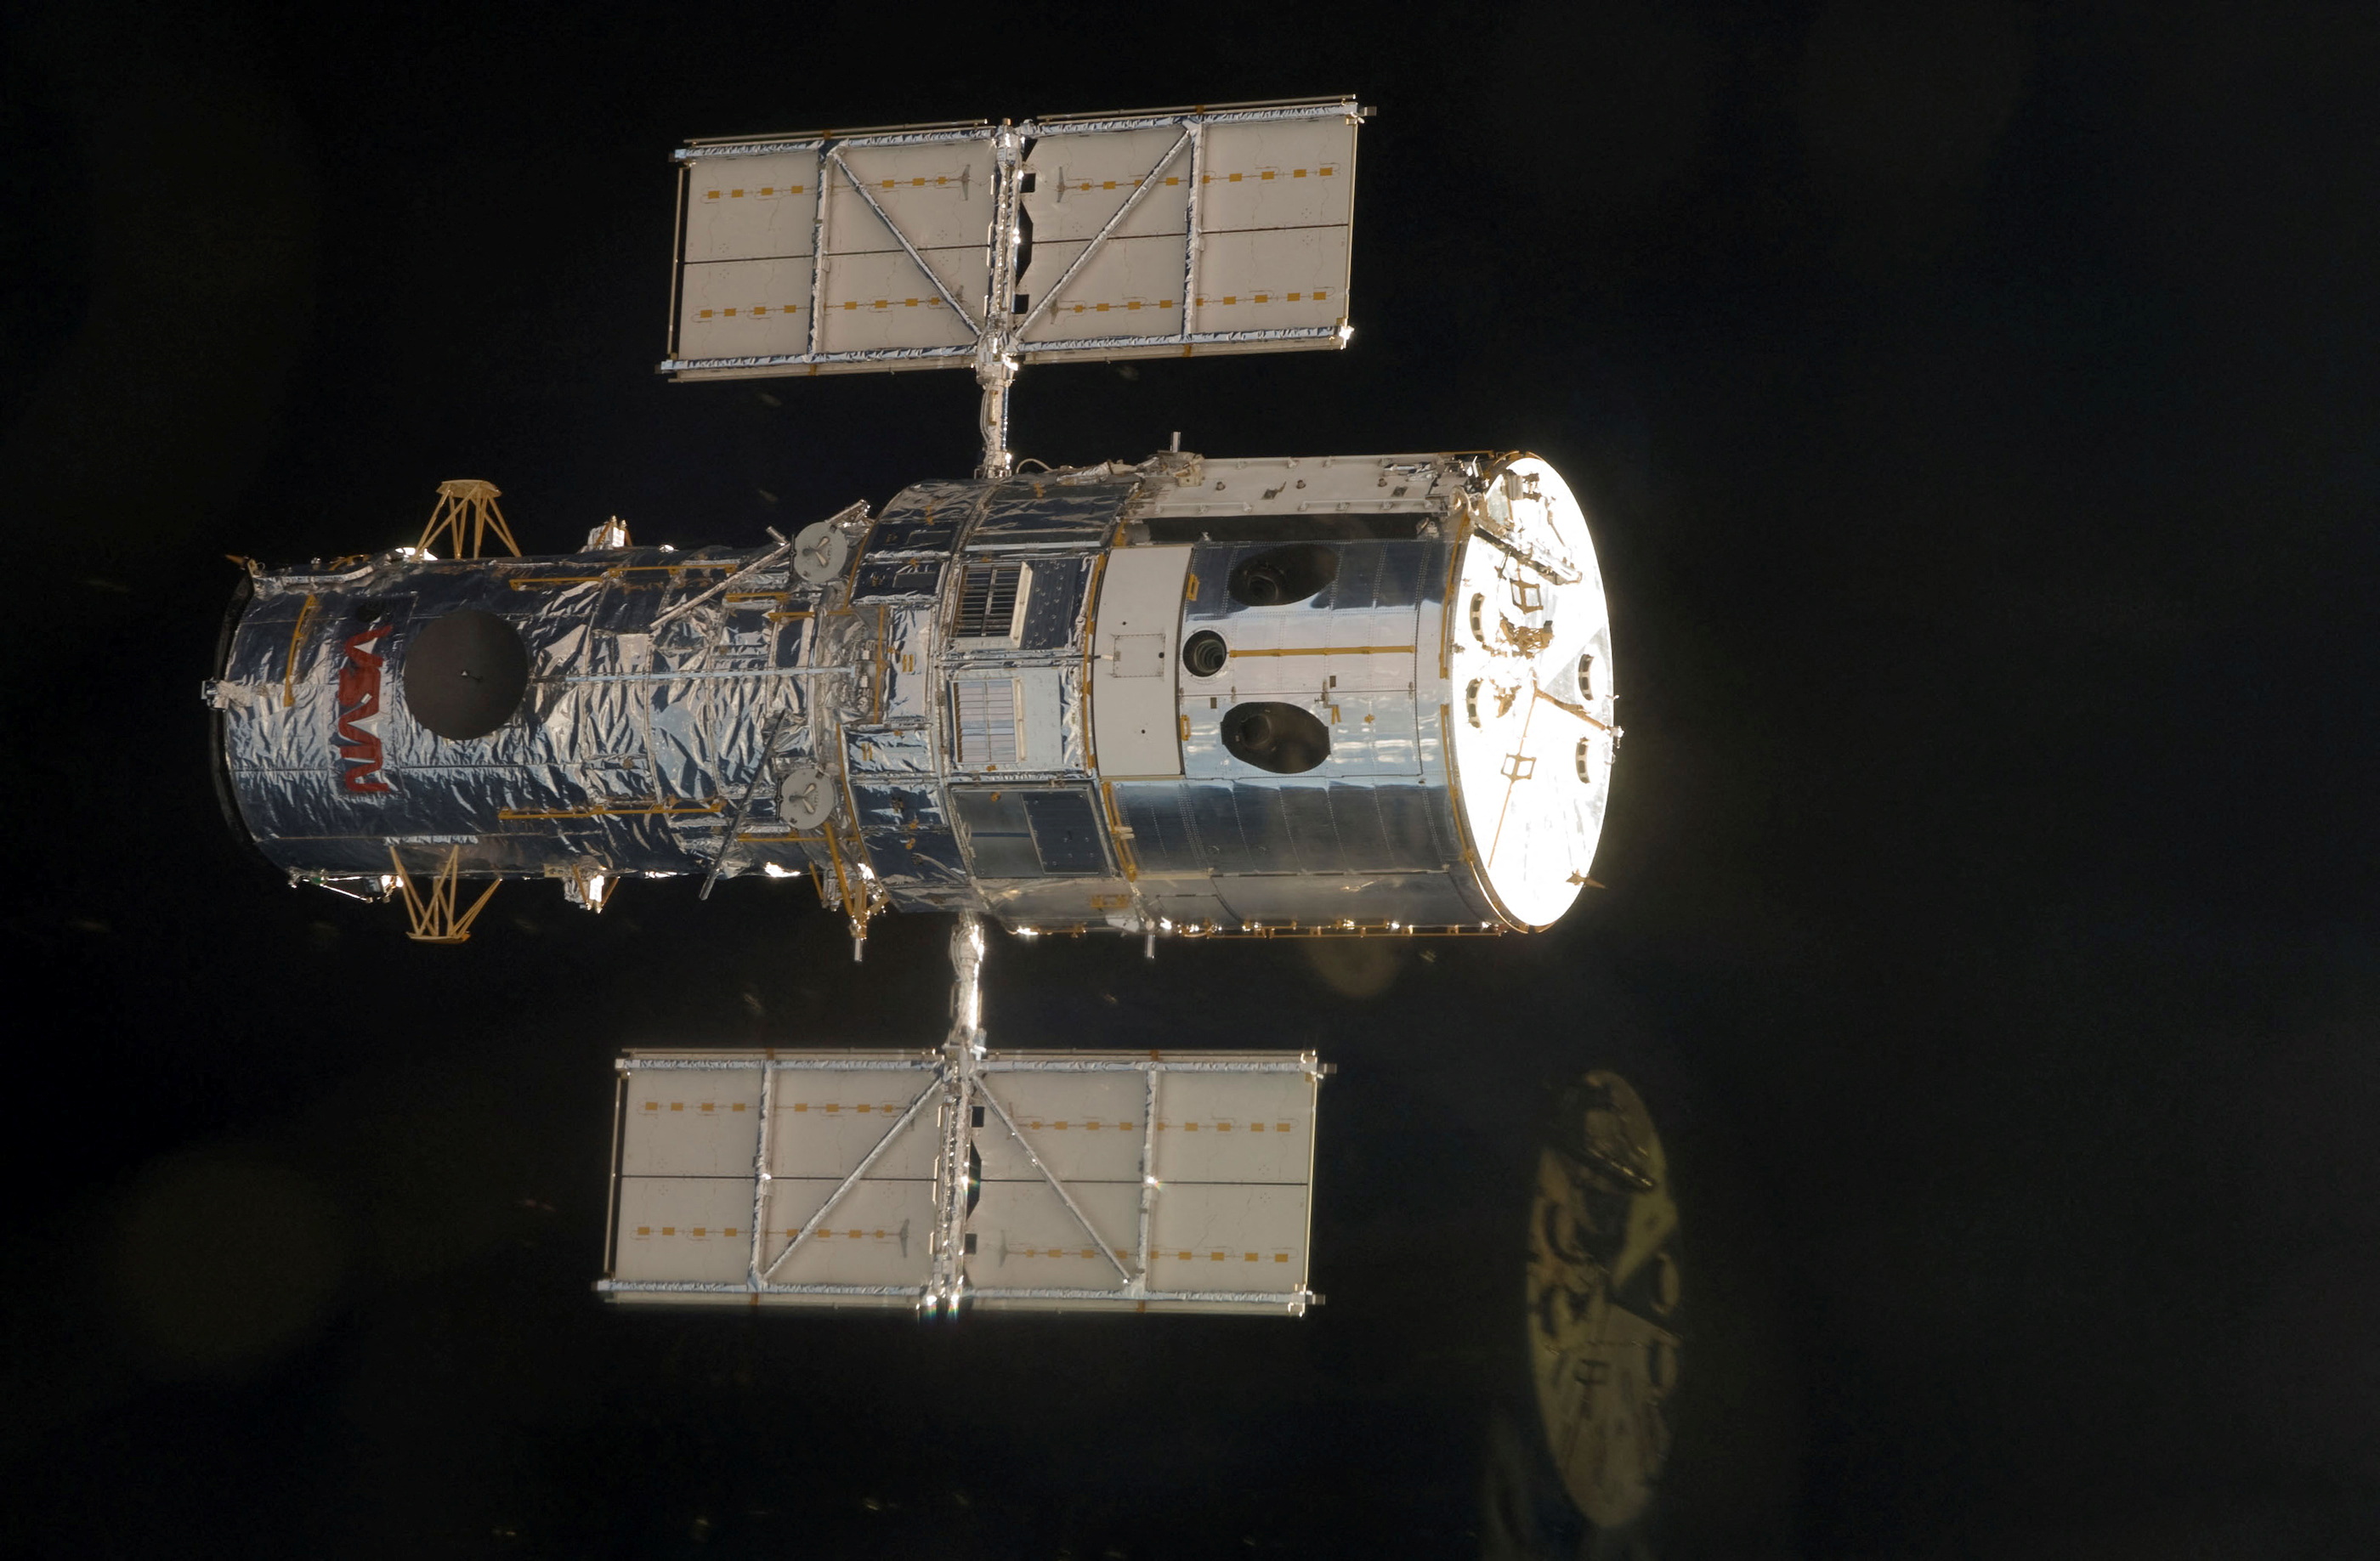 This still image shows the Hubble Space Telescope